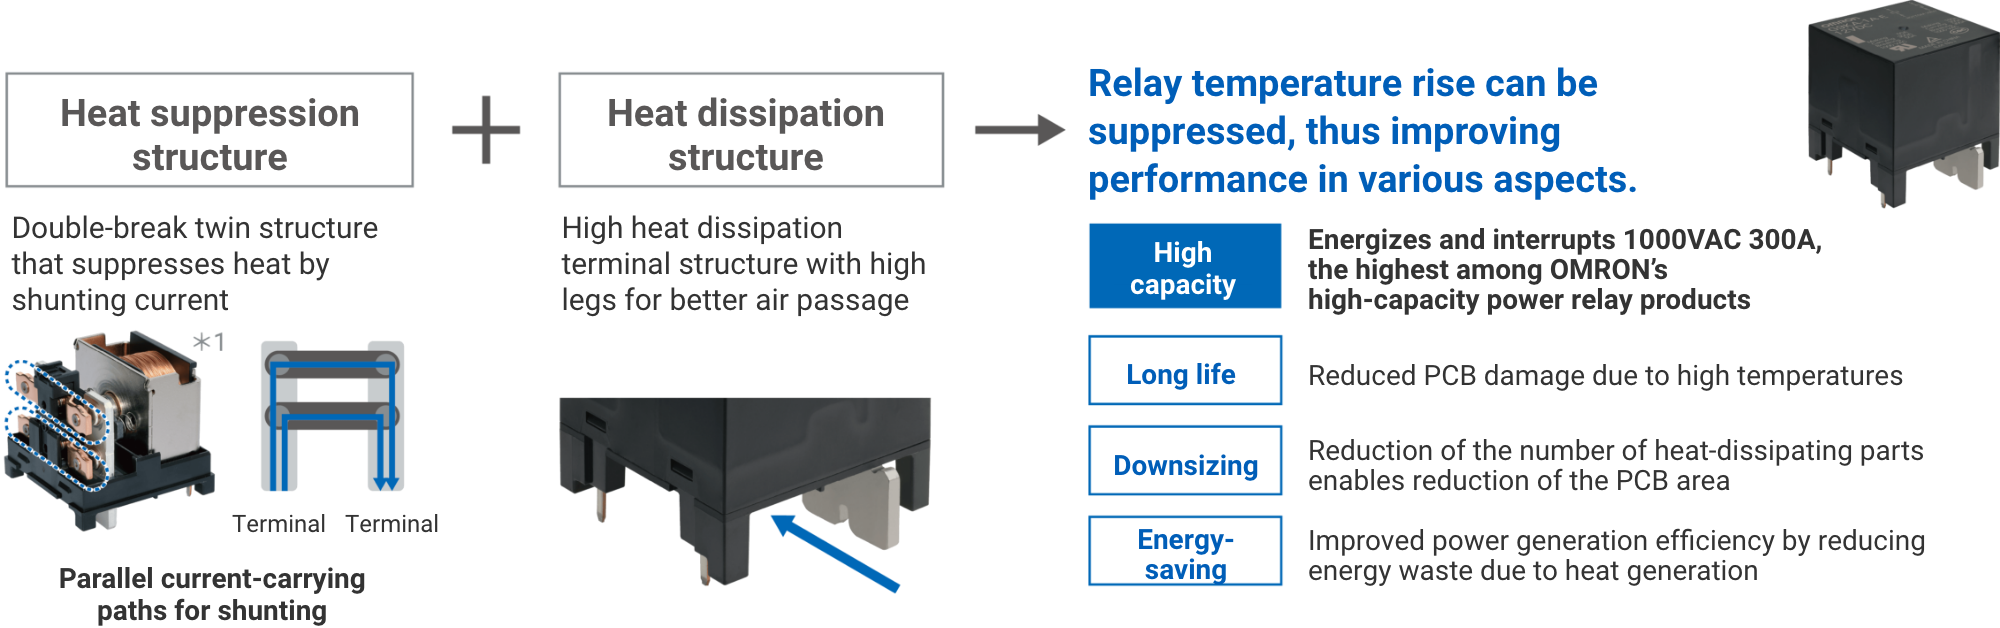 Heat suppression structure [Double-break twin structure that suppresses heat by shunting current (Parallel current-carrying paths for shunting)] + Heat dissipation structure [High heat dissipation terminal structure with high legs for better air passage] => Relay temperature rise can be suppressed, thus improving performance in various aspects. [High capacity: Energizes and interrupts 1000VAC 300A, the highest among OMRON’s high-capacity power relay products] [Long life: Reduced PCB damage due to high temperatures] [Downsizing: Reduction of the number of heat-dissipating parts enables reduction of the PCB area] [Energy-saving: Improved power generation efficiency by reducing energy waste due to heat generation]